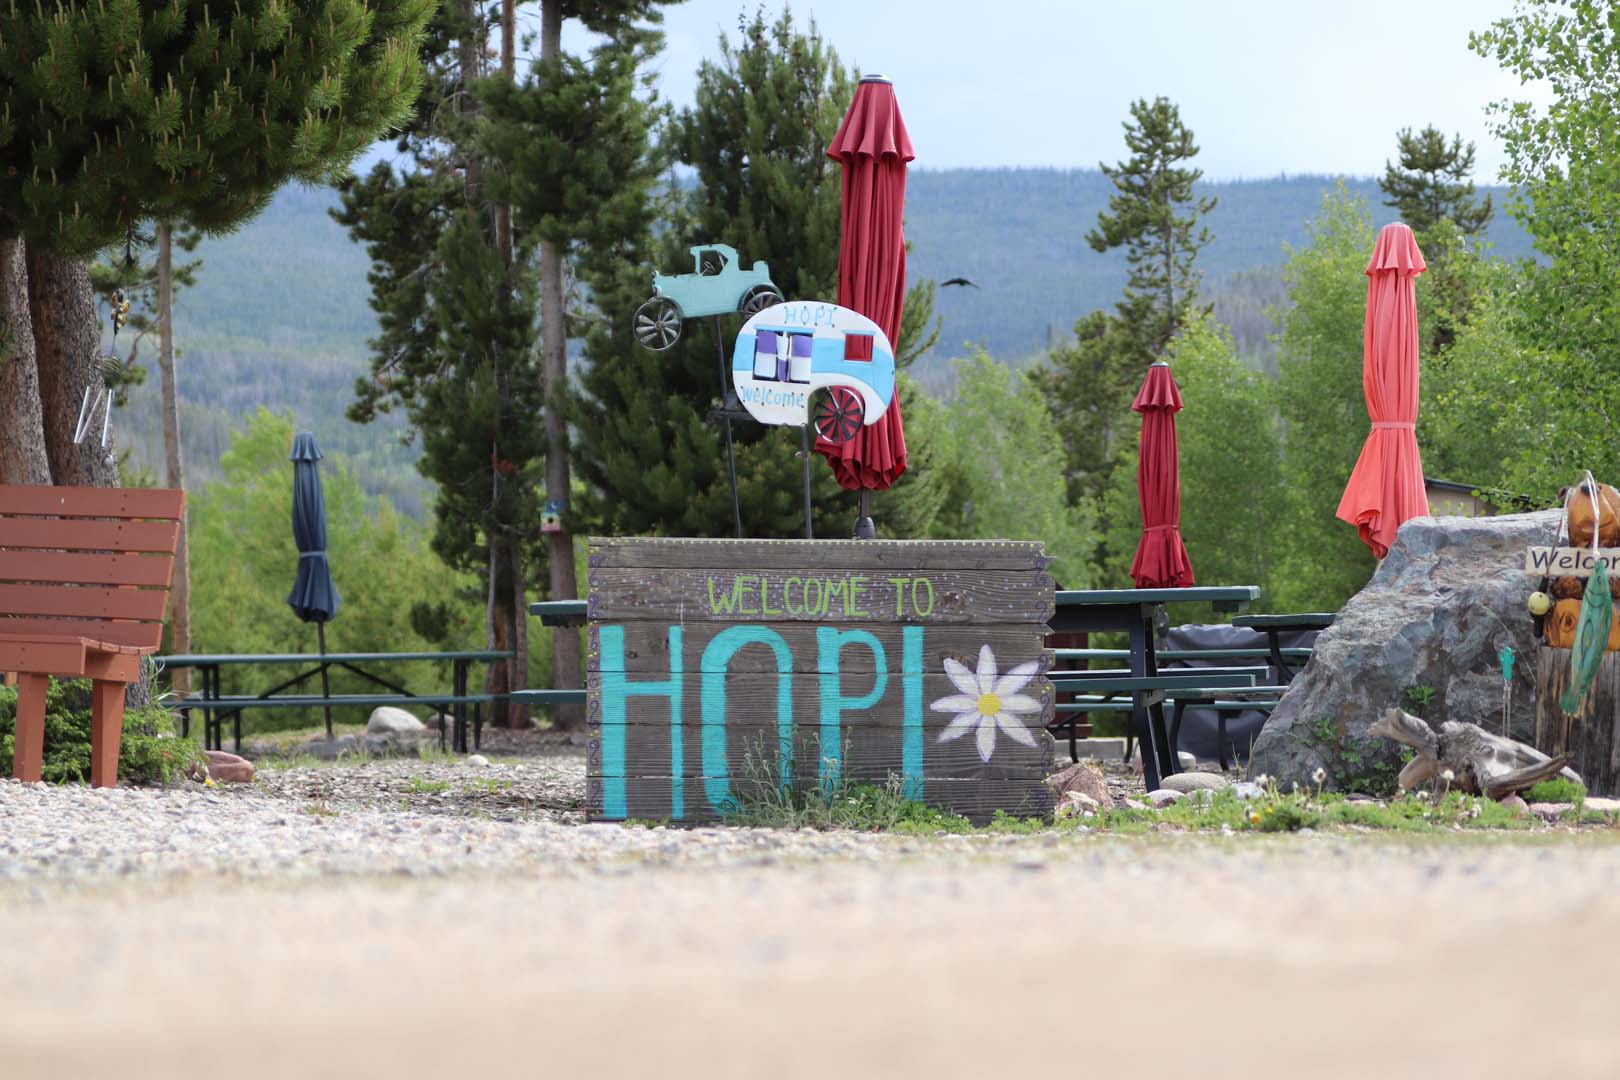 Camp hopi welcome sign with picnic benches